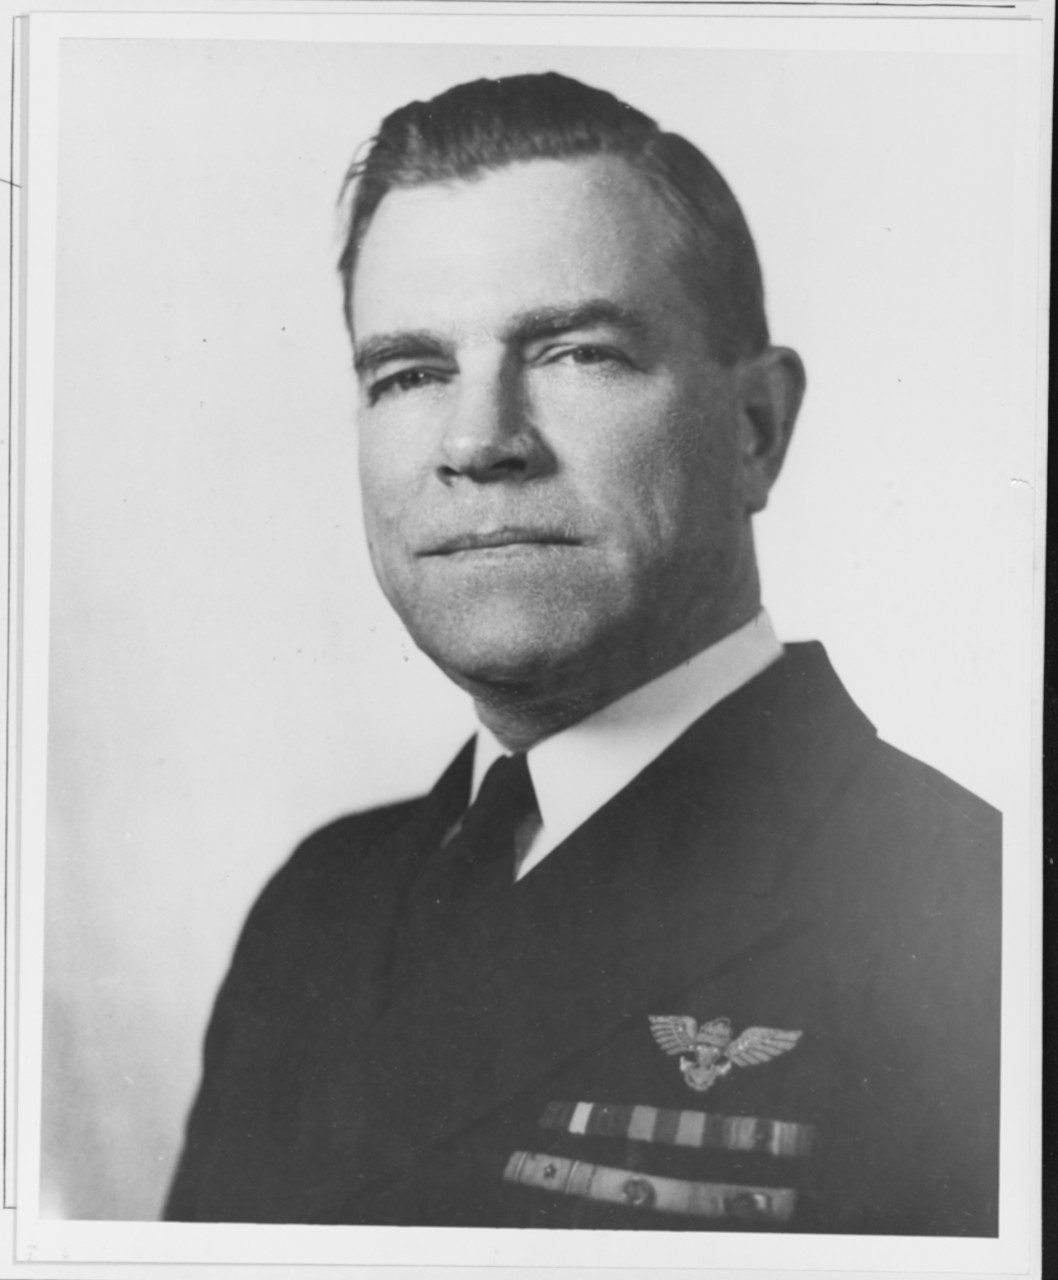 Vice Admiral Patrick Niesson Lynch Bellinger